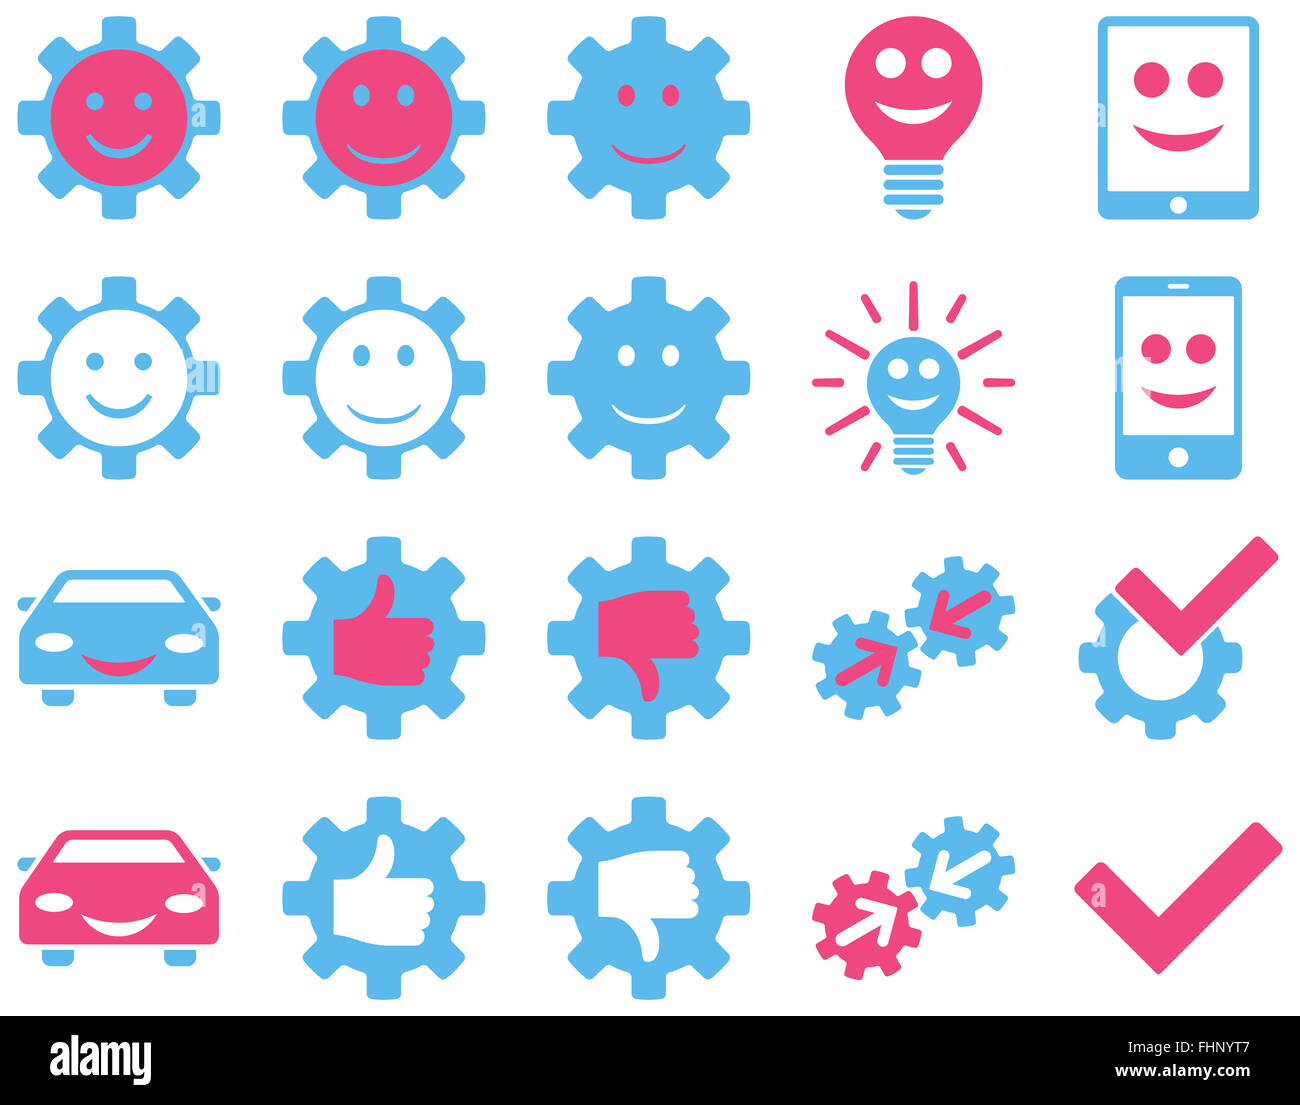 Tools and Smile Gears Icons Stock Photo